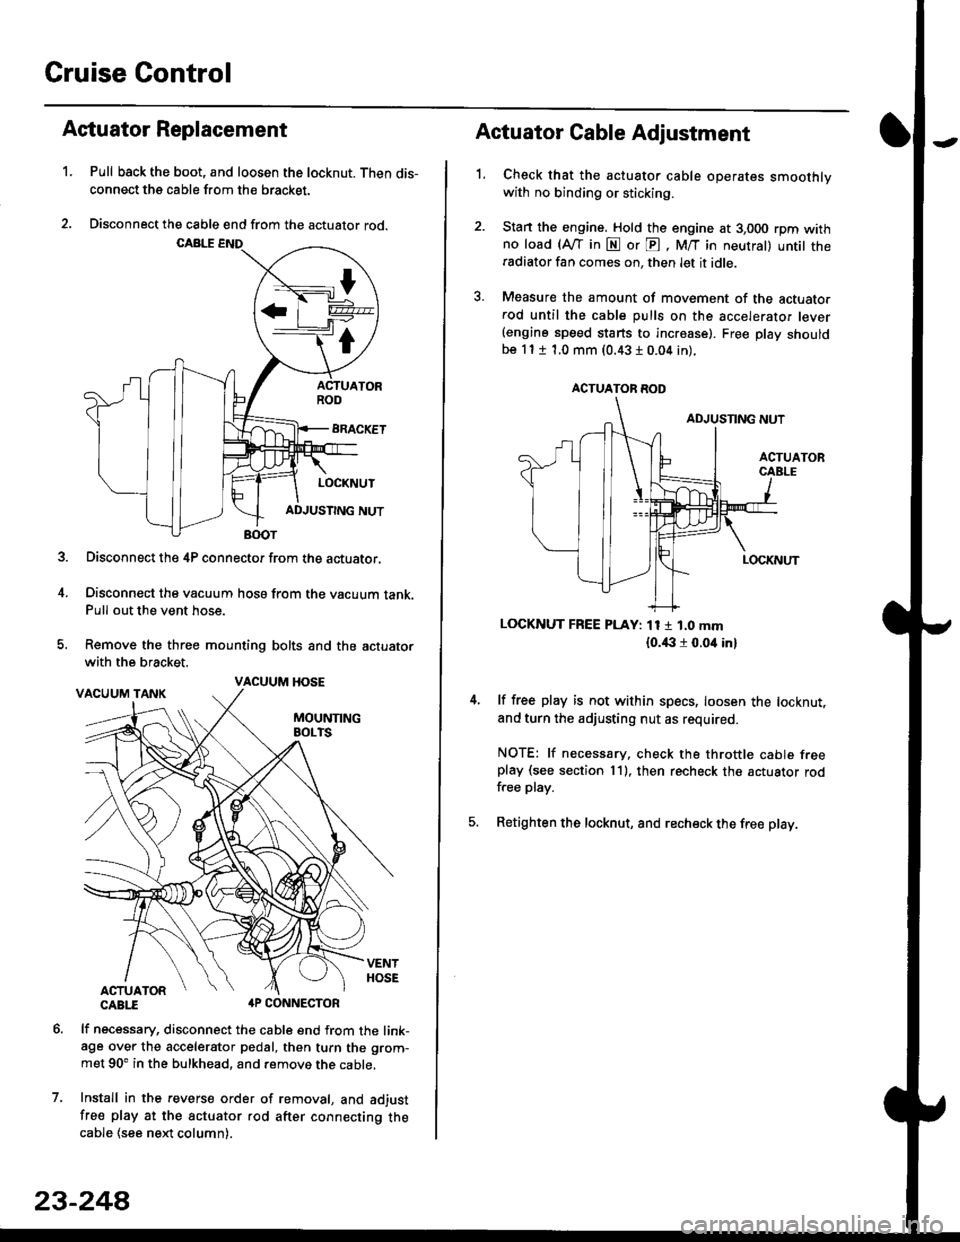 HONDA CIVIC 1999 6.G Workshop Manual Cruise Control
t
D=
t
Astuator Replacement
1.Pull back the boot, and loosen the locknut. Then dis-
connect the cable from the bracket.
Disconnect the cable end from the actuator rod.
Disconnect the 4P